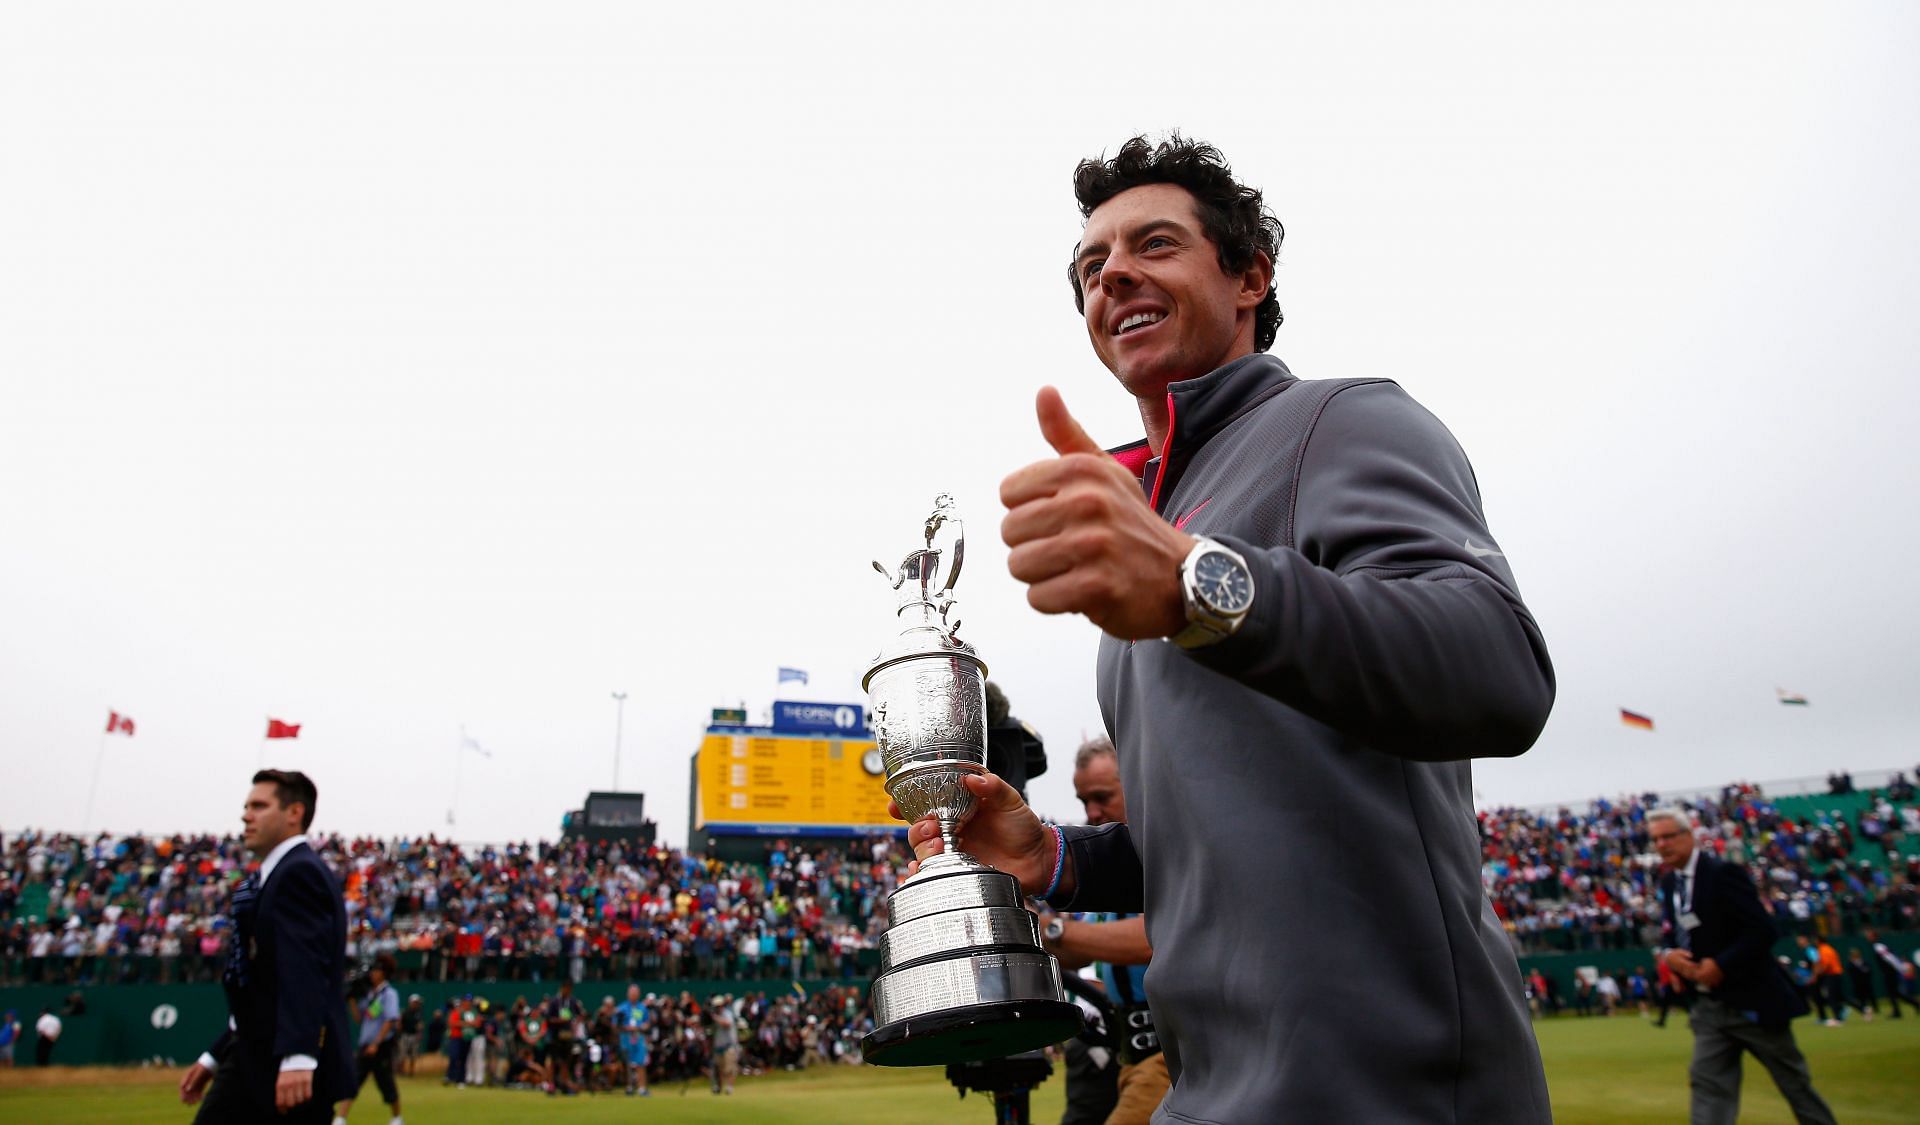 Rory McIlroy emerged victorious in 2014, the last time Open Championship was played at Royal Liverpool